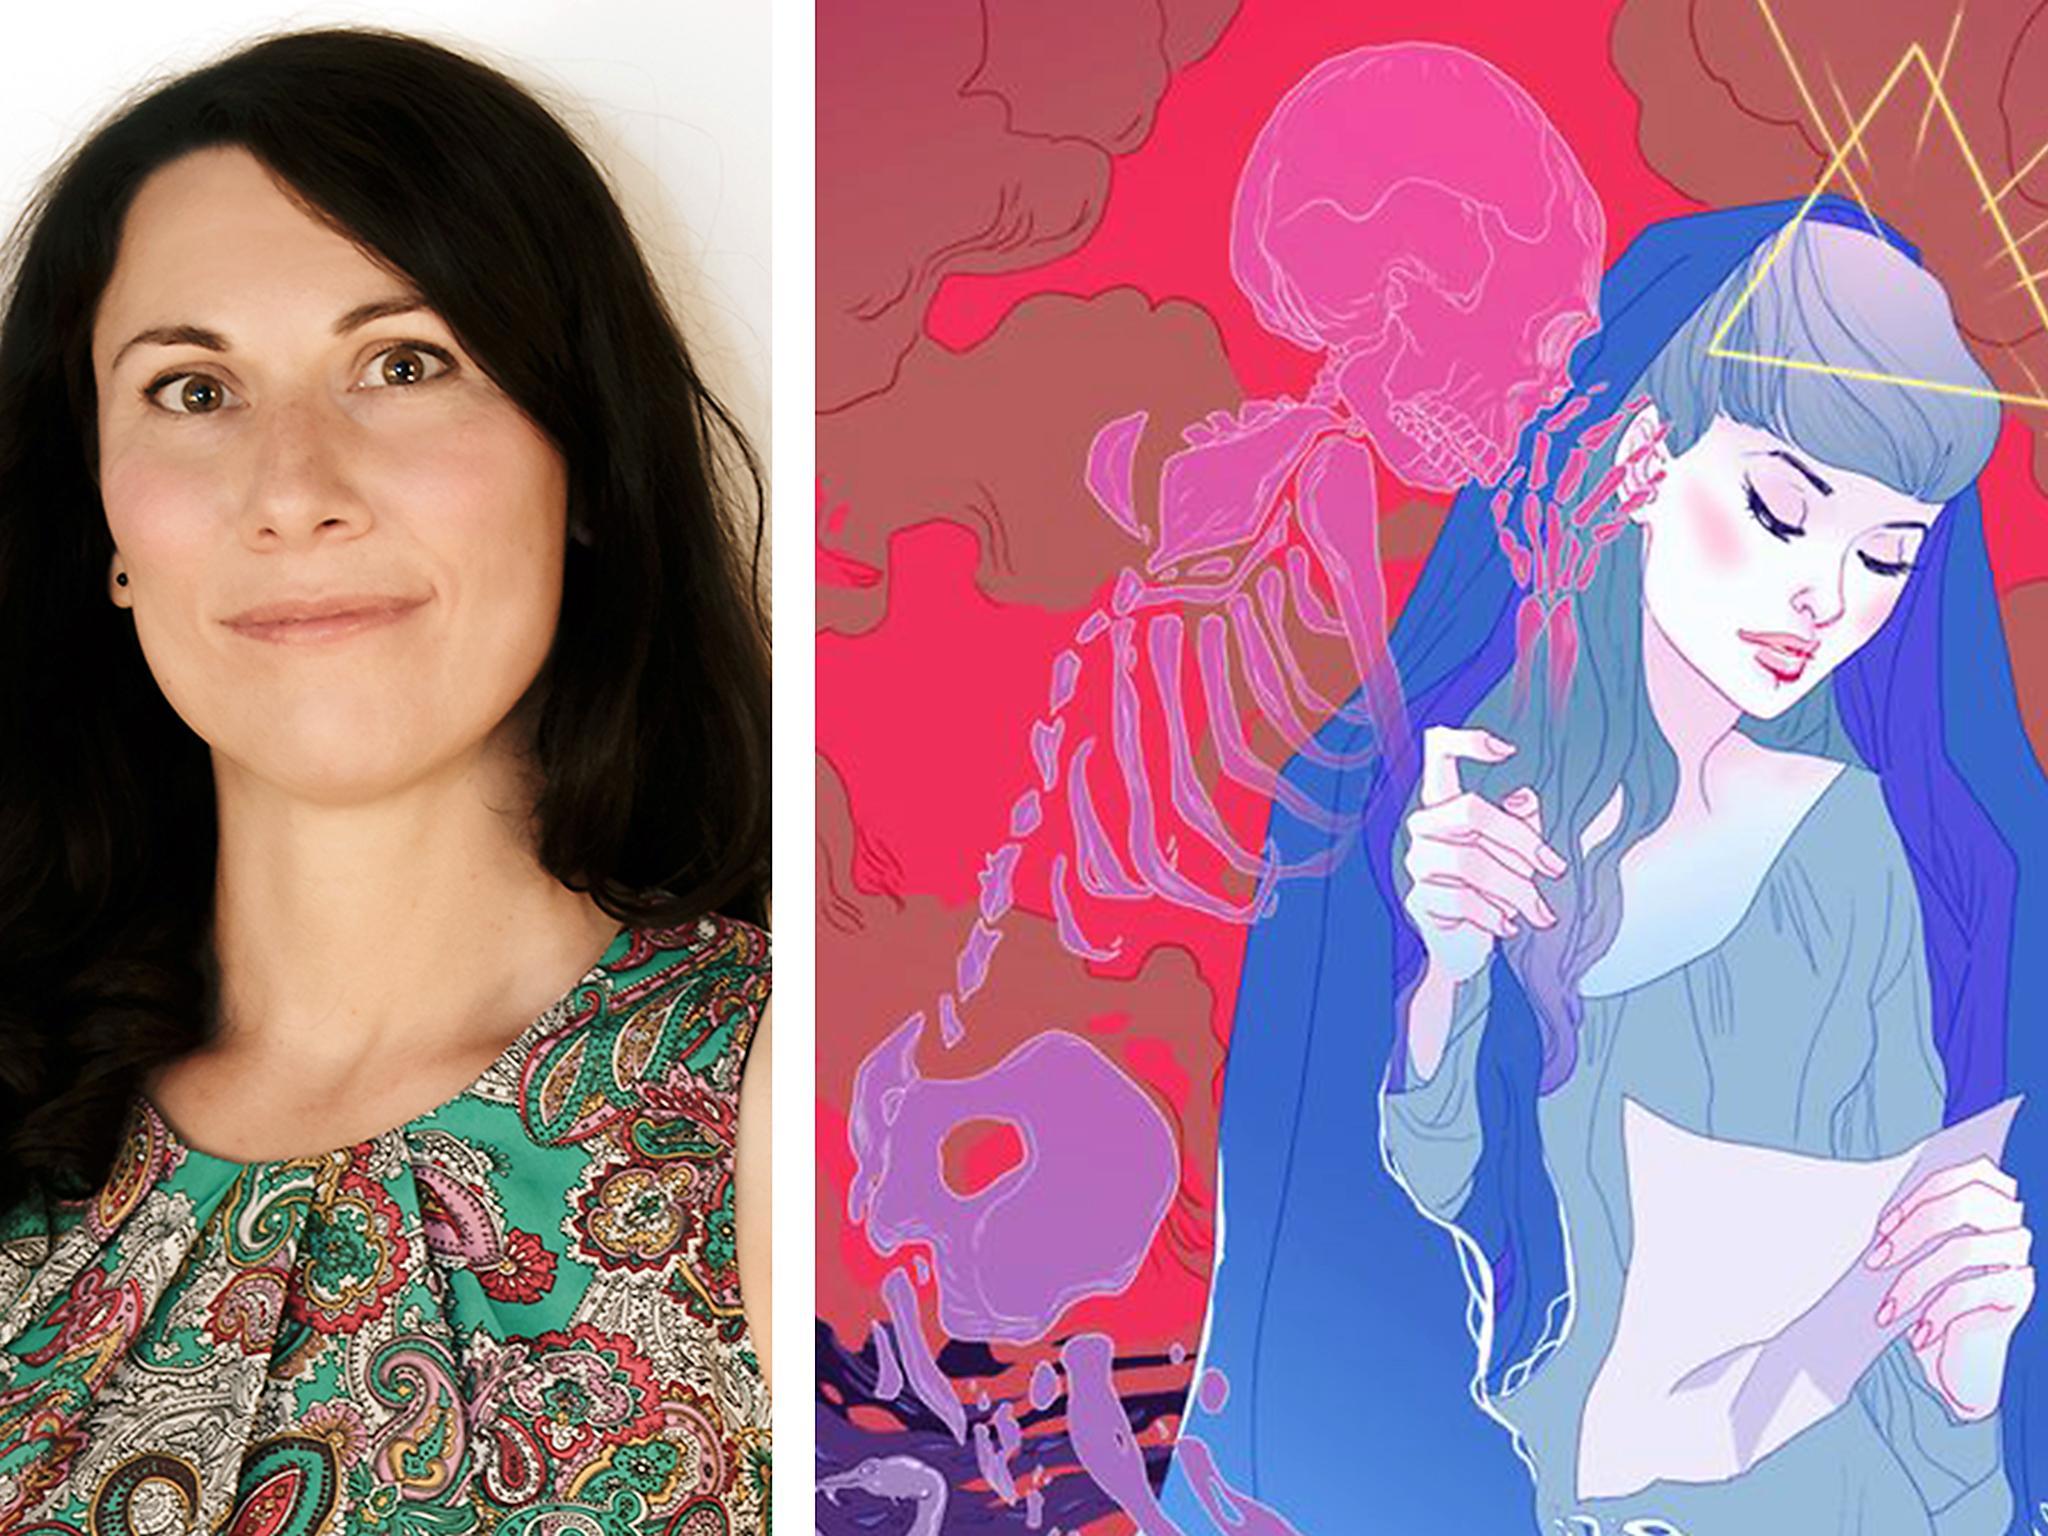 Marguerite Sauvage is a Sydney-based illustrator who has worked on DC Bombshells